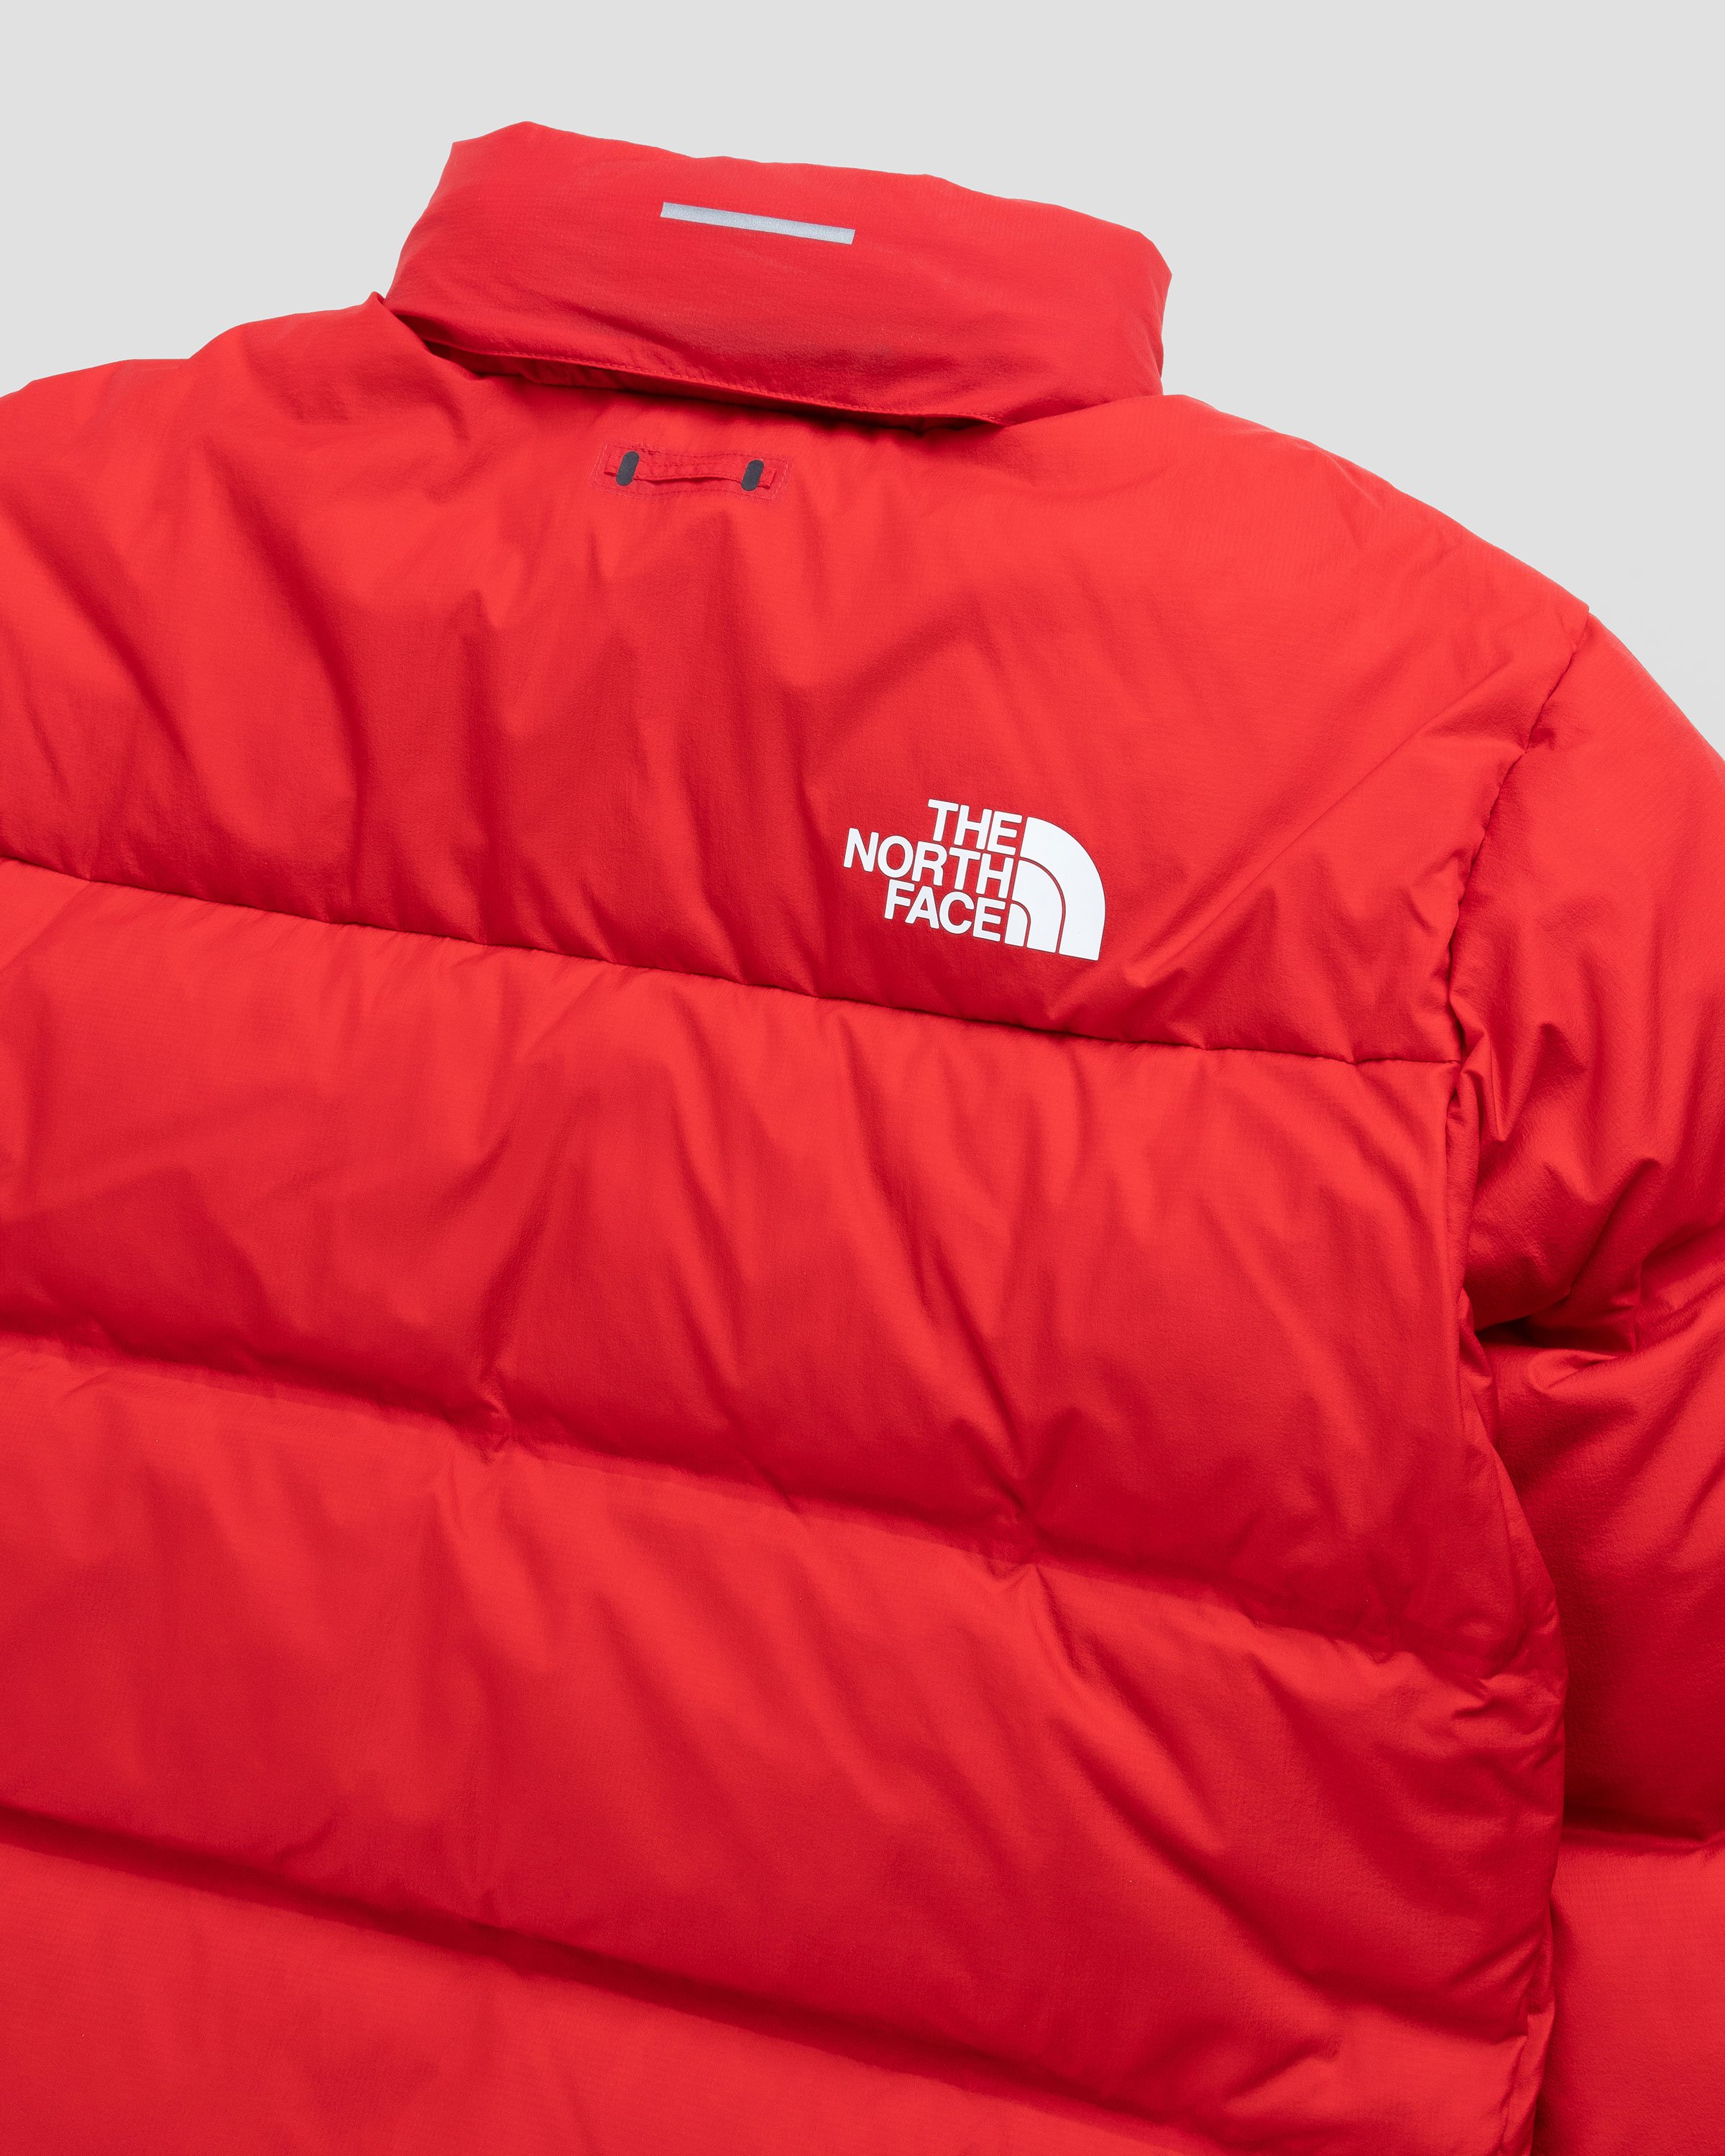 The North Face - Rmst Nuptse Jacket Red - Clothing - Red - Image 5